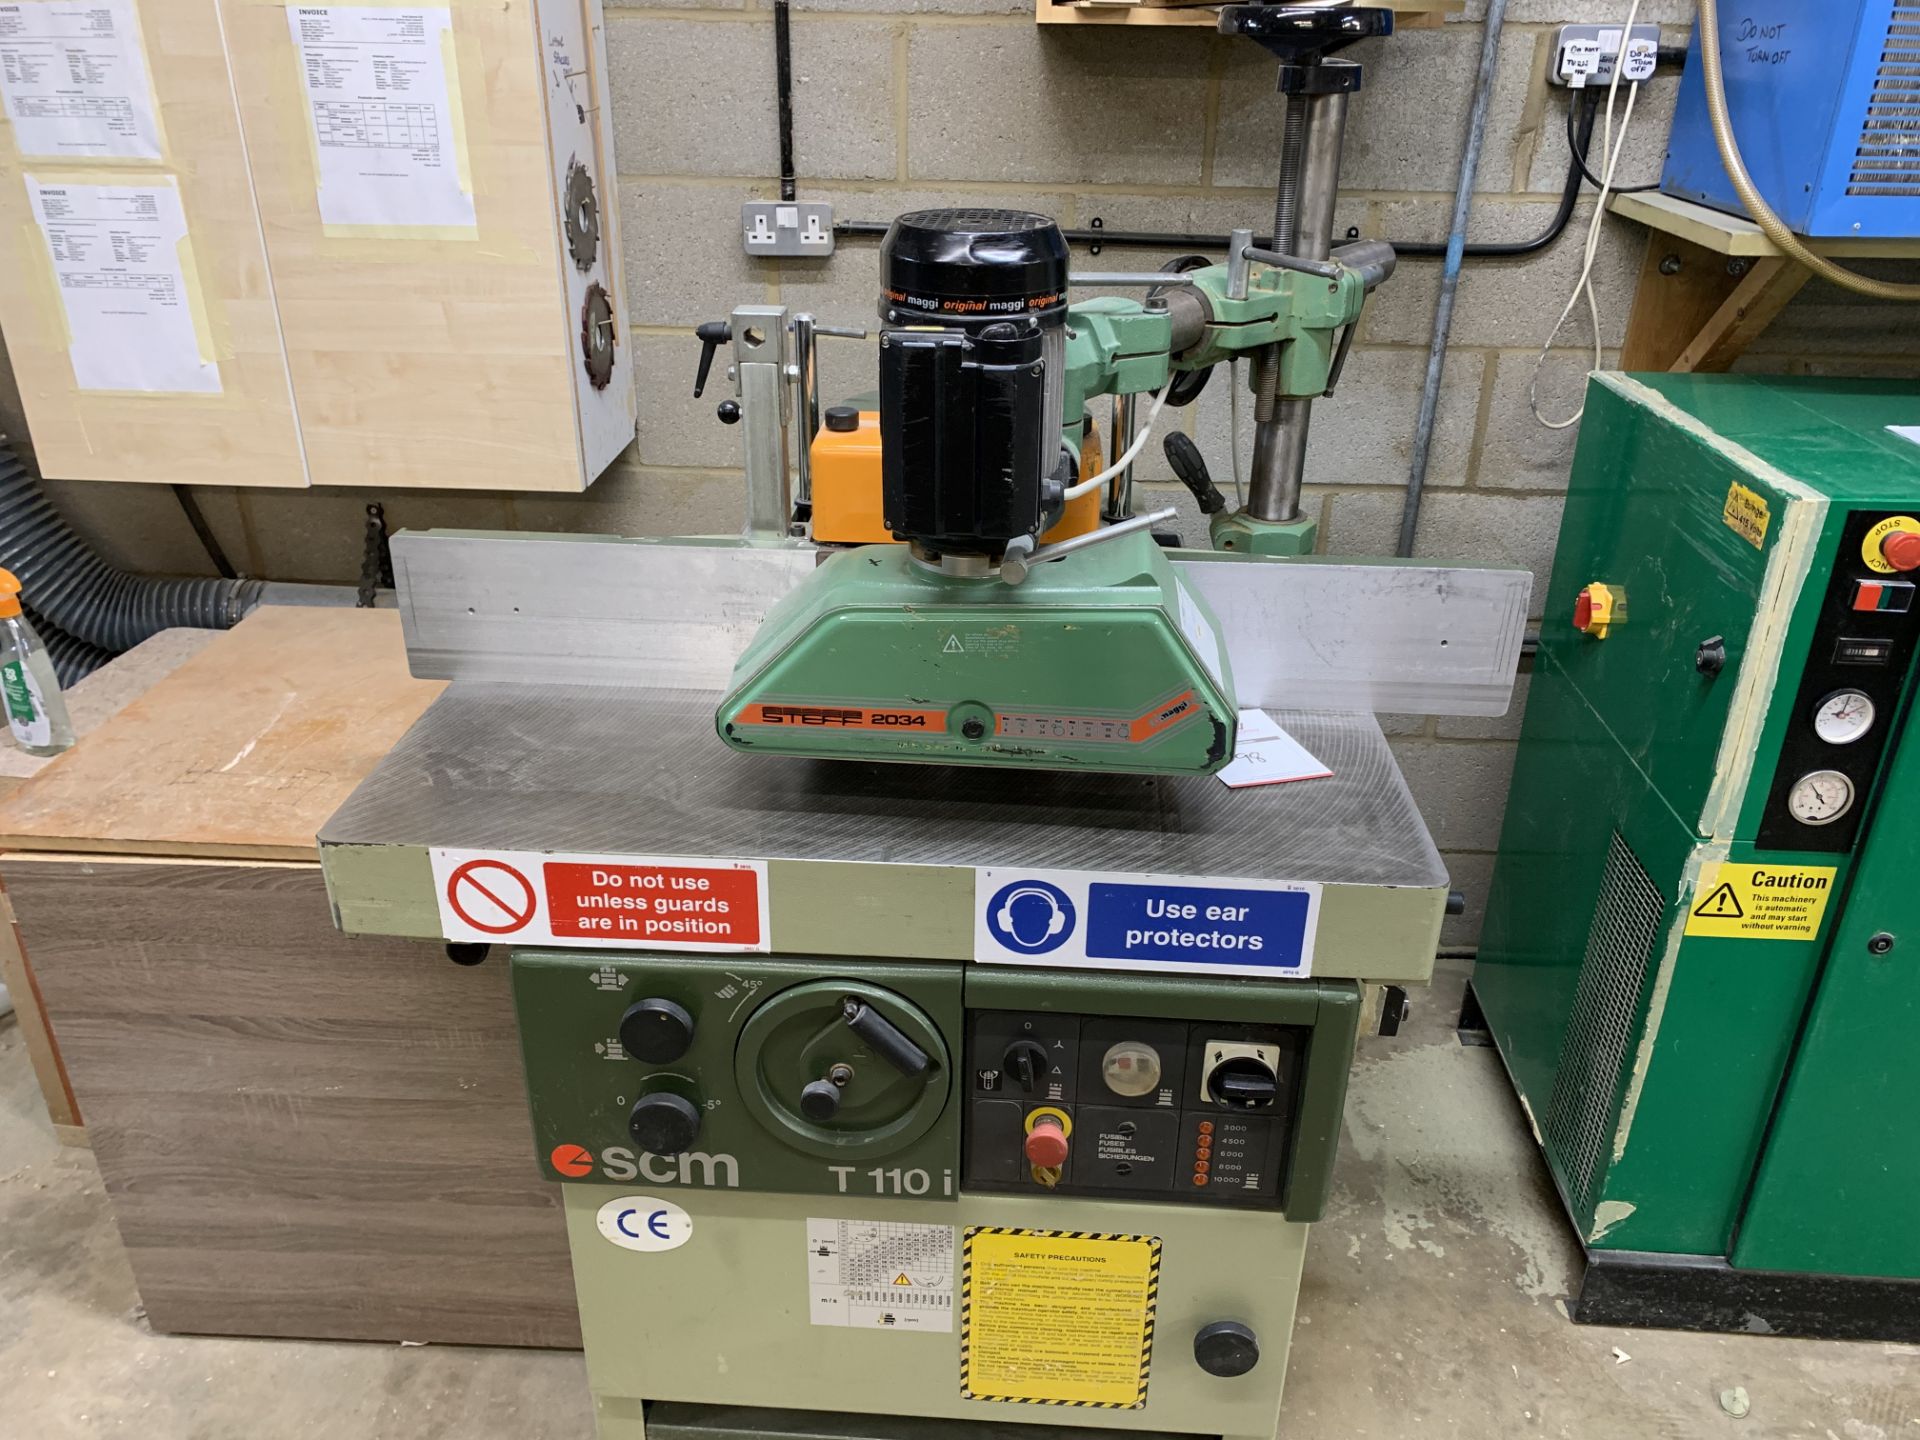 SCM type T110i Spindle Moulder with Maggi power feed and associated tooling